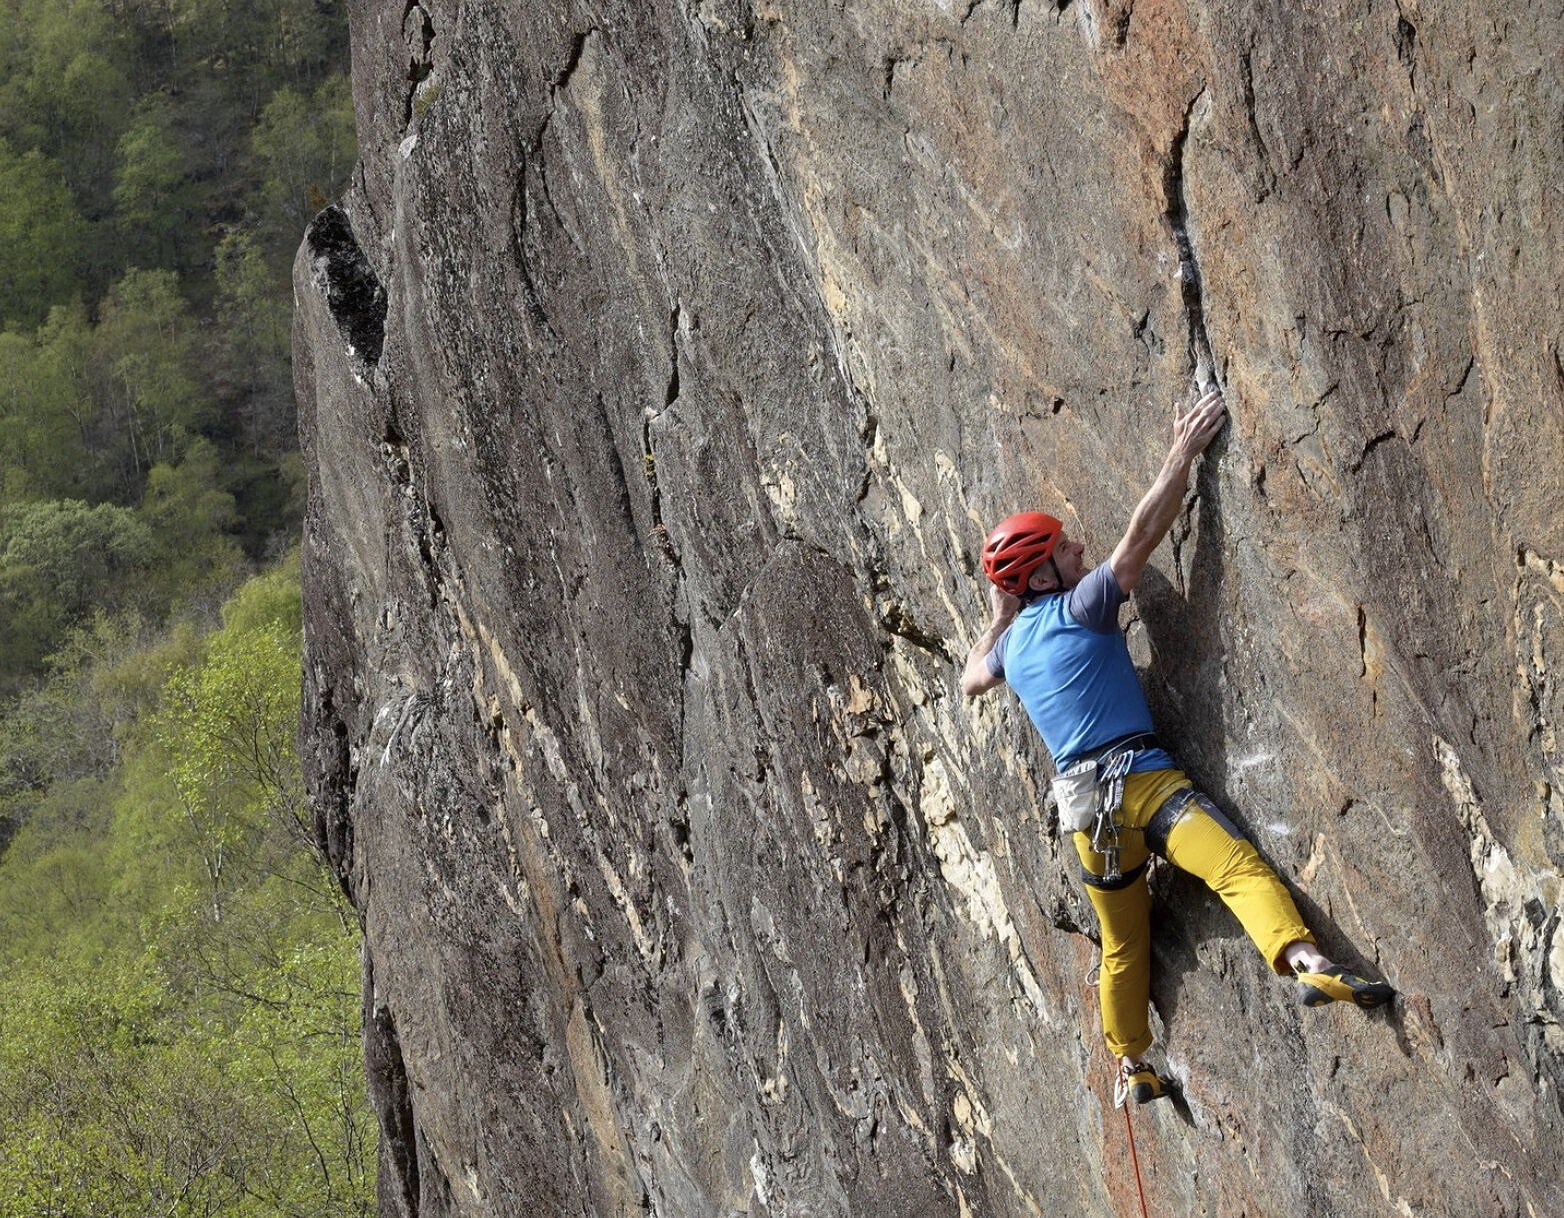 Dave MacLeod on Out For Blood E9 7a.  © Dave MacLeod